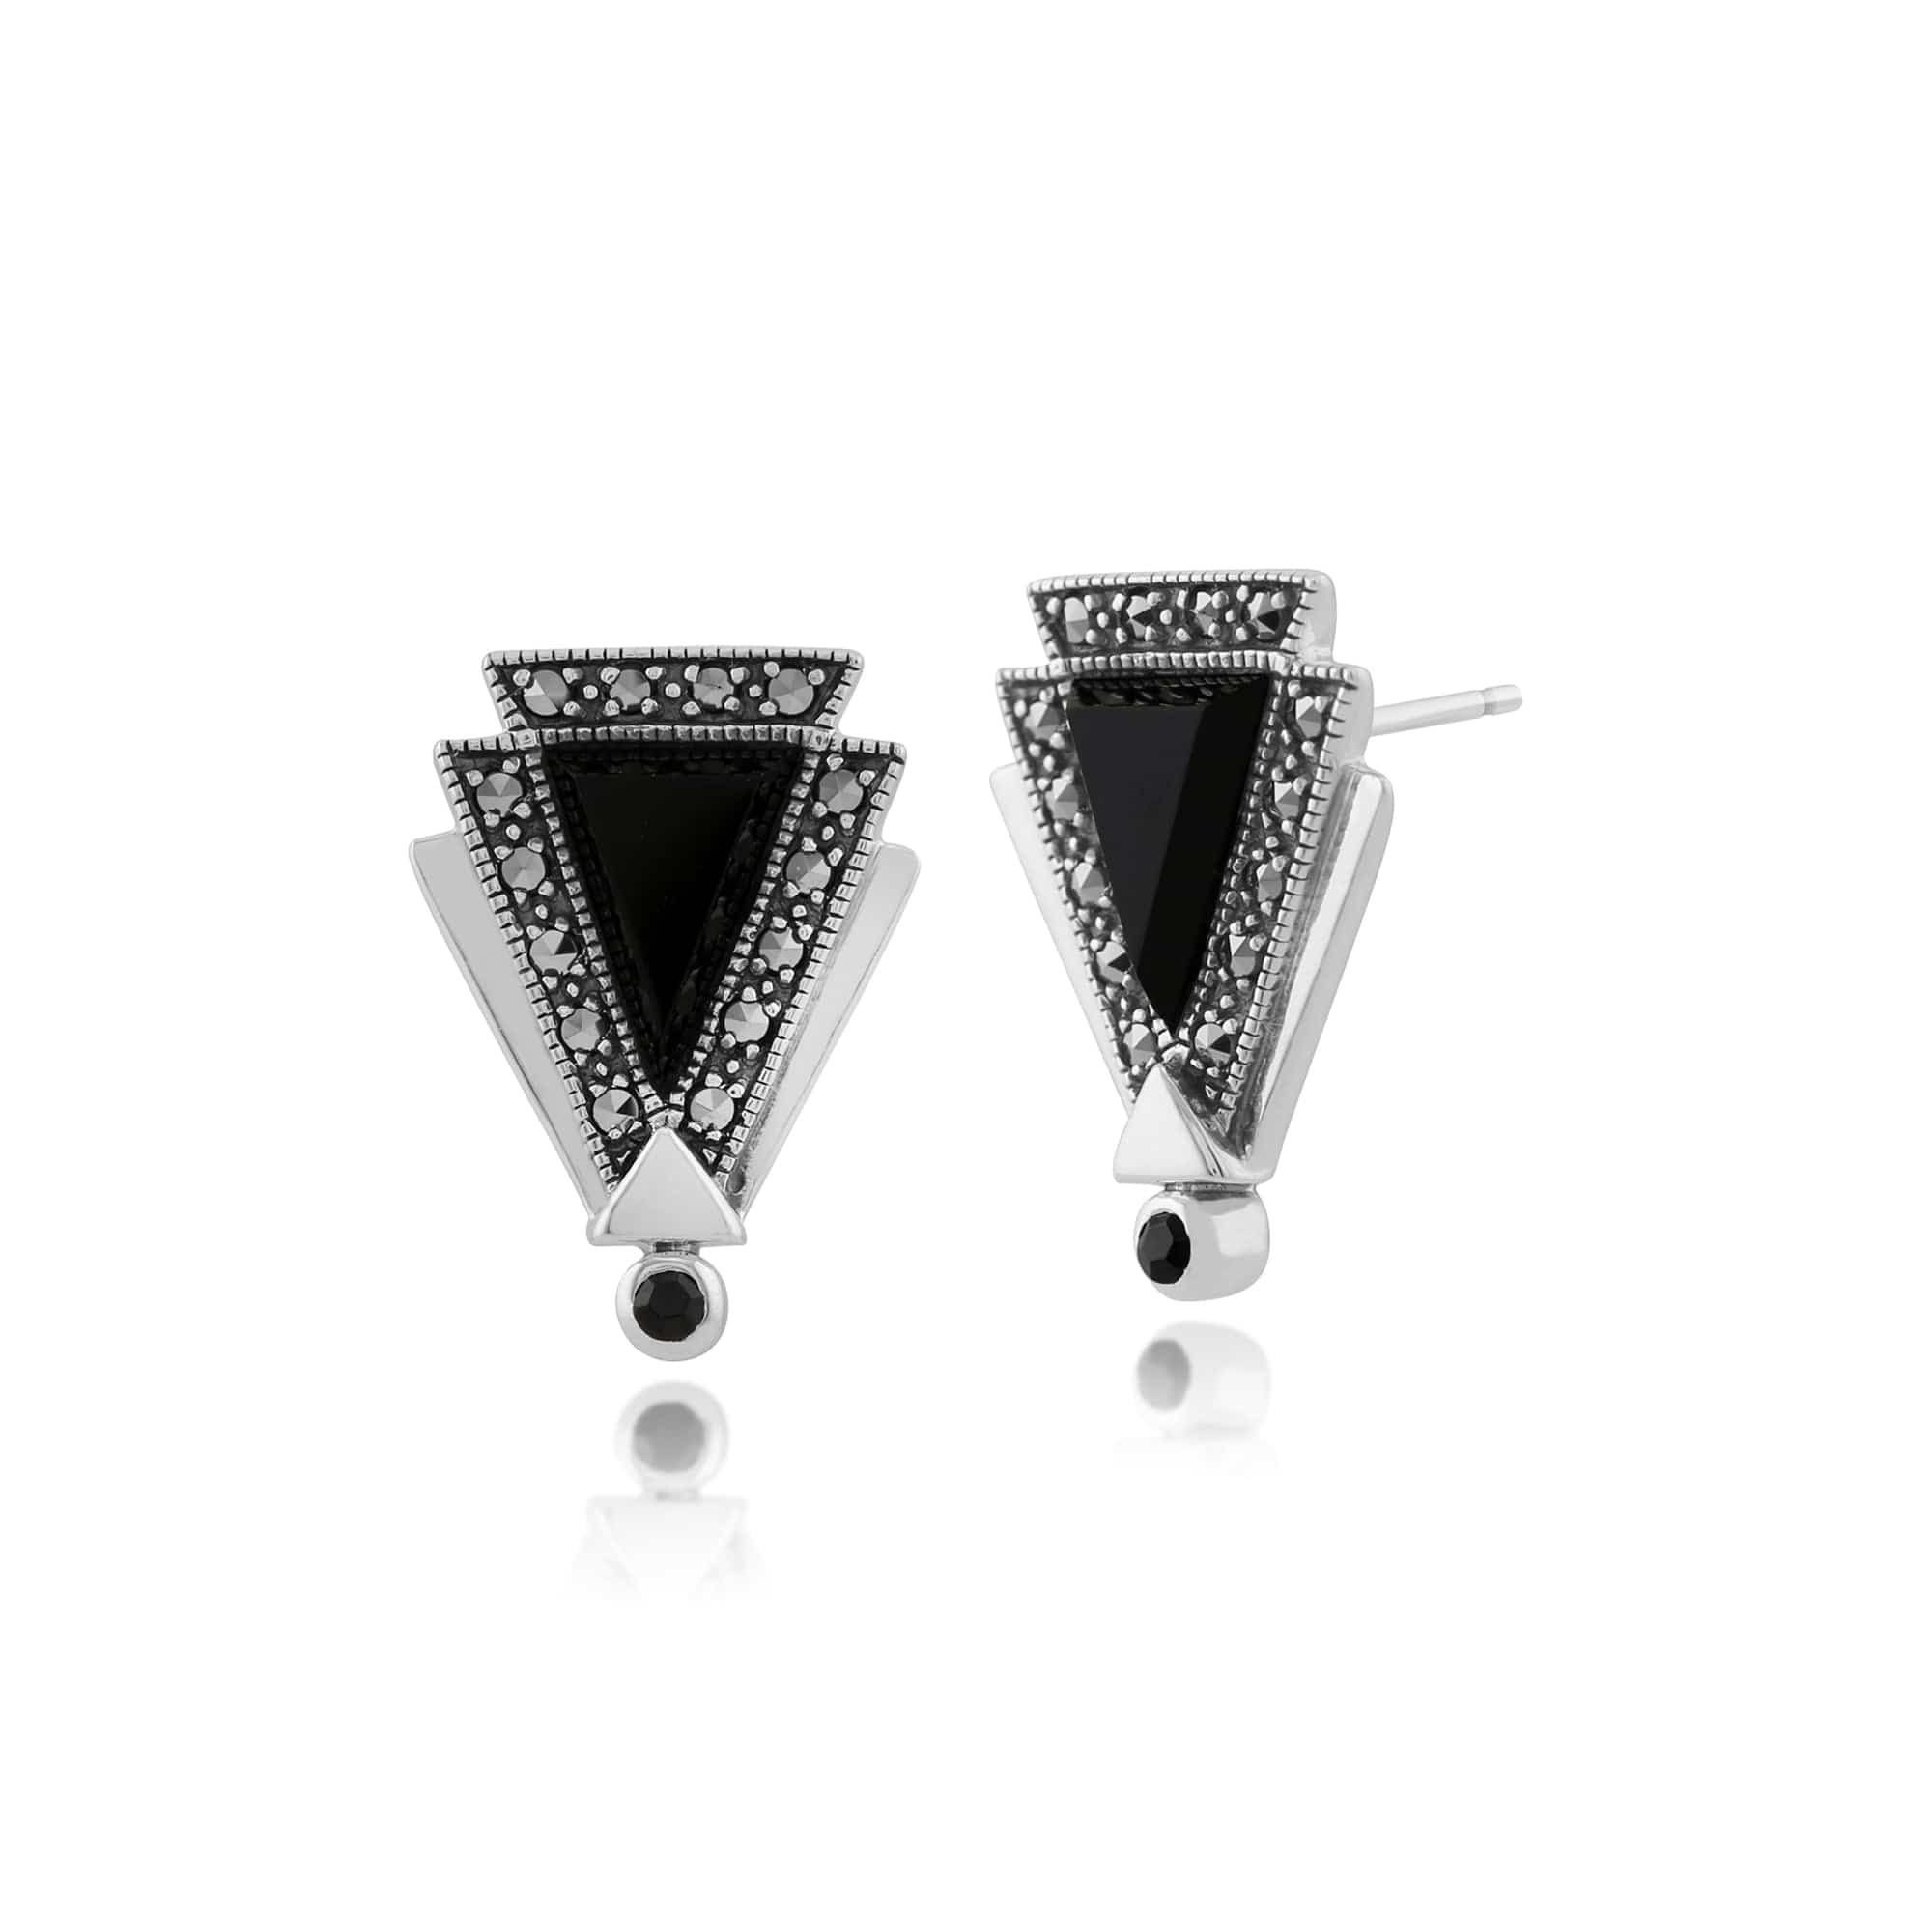 Image of Art Deco Style Black Onyx, Marcasite & Black Spinel Triangle Stud Earrings in Sterling Silver